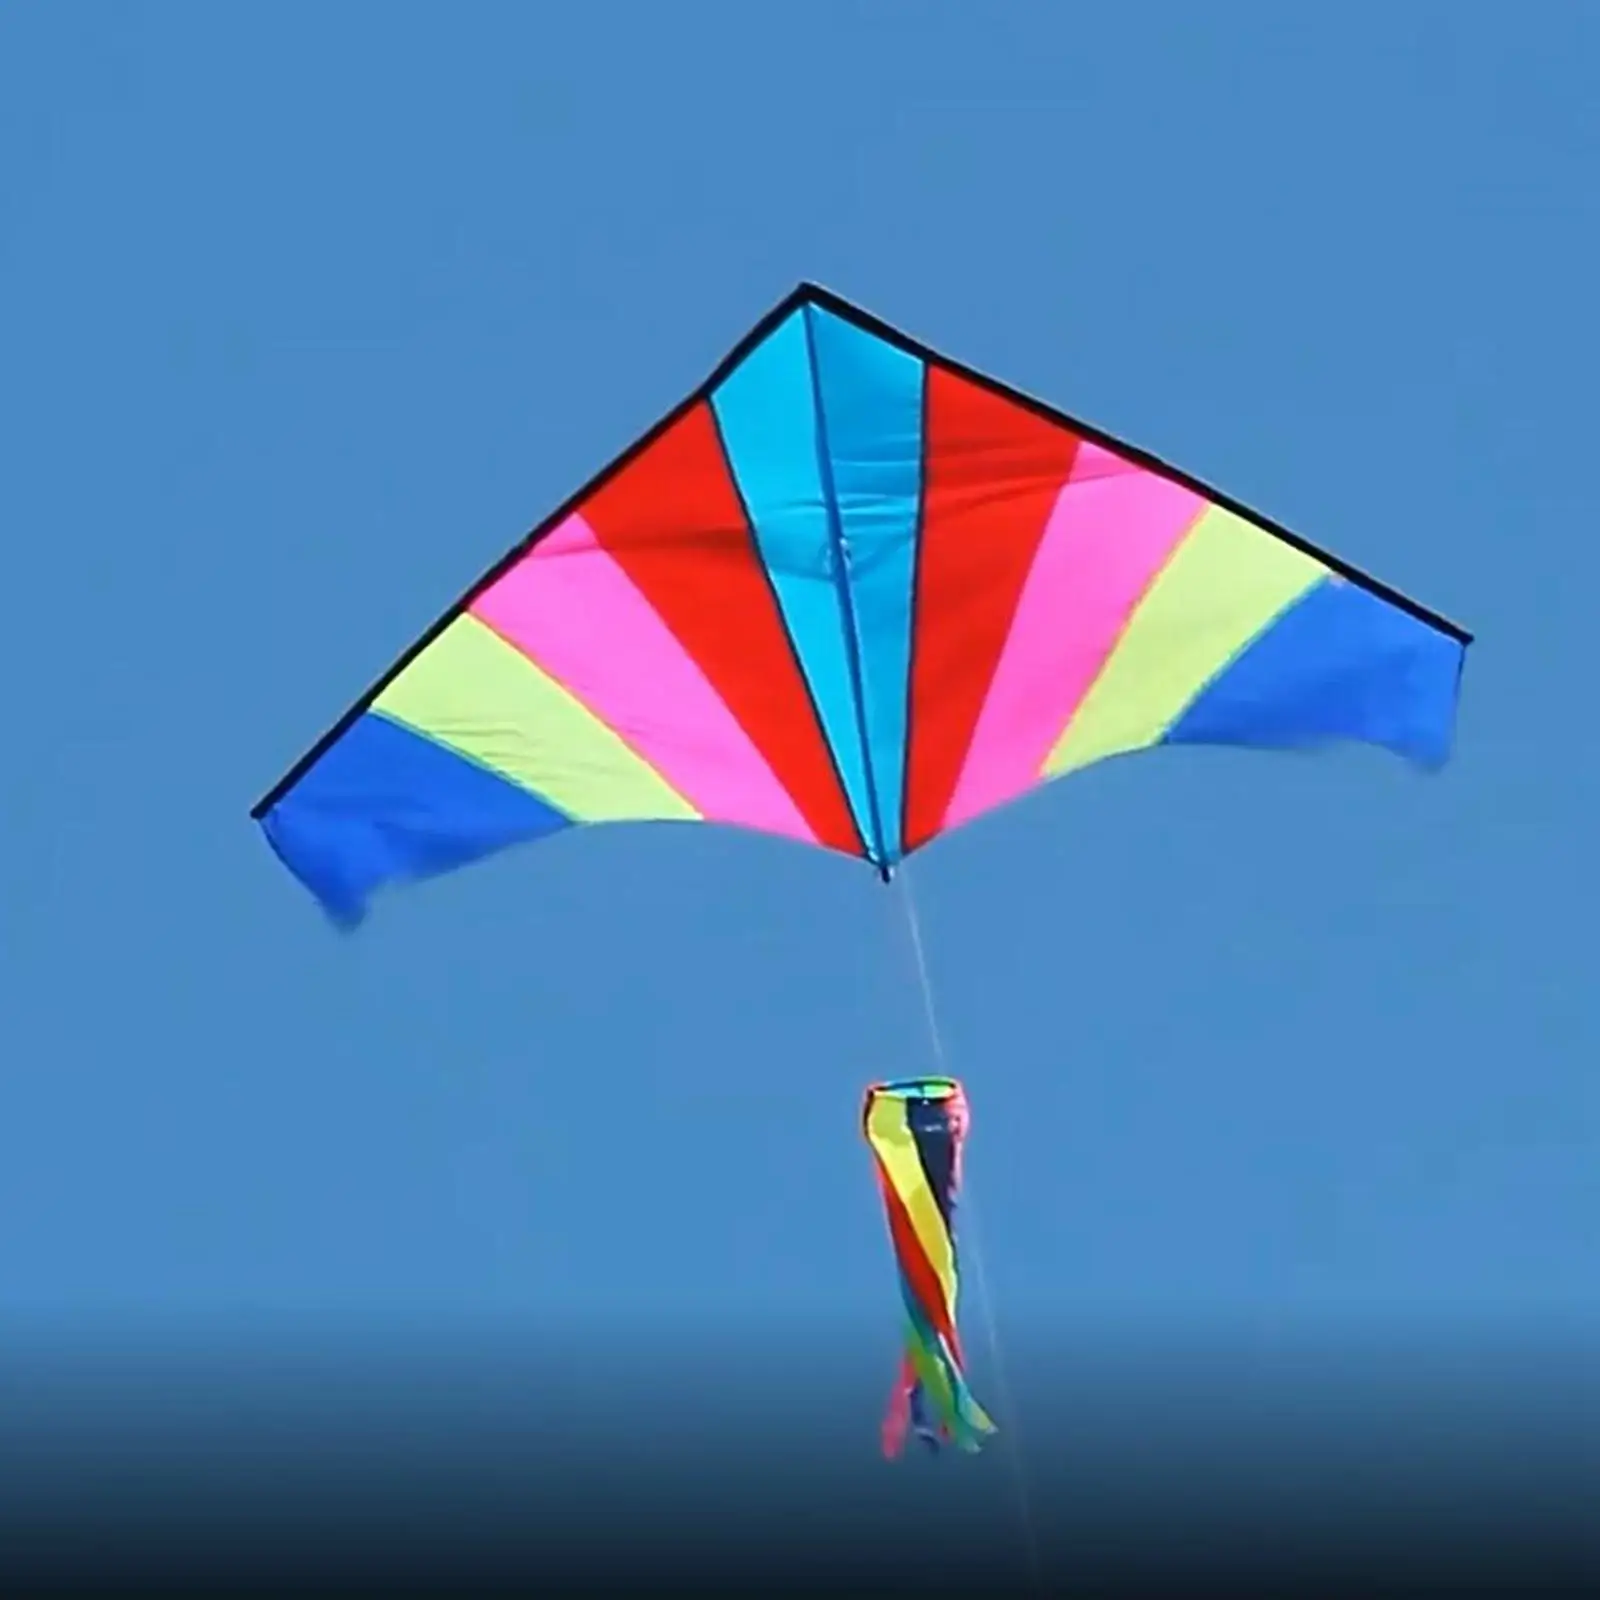 Giant Delta Kite with String for Family Trips Games Teenagers